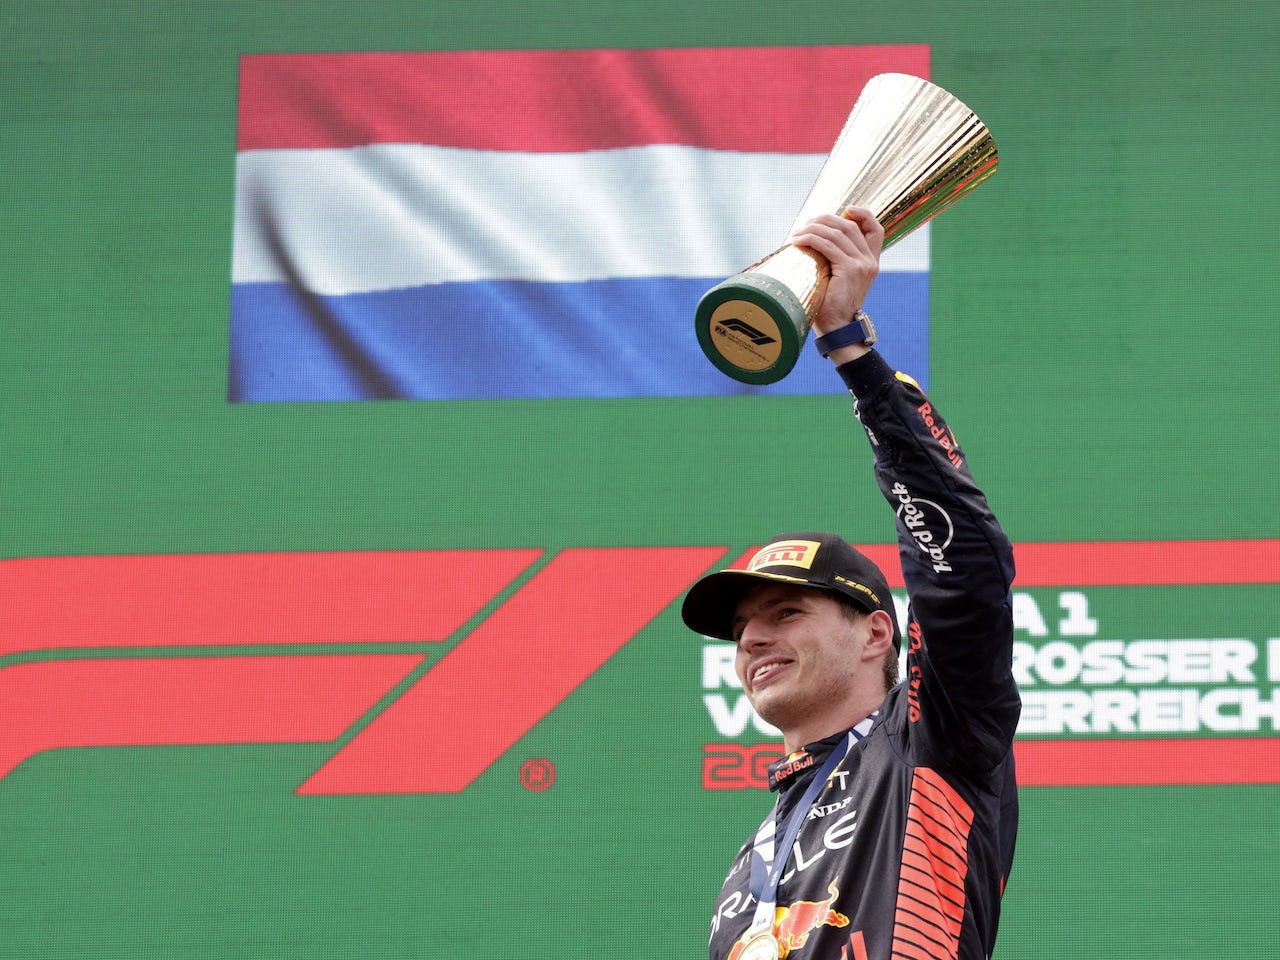 Max Verstappen continues march towards title with dominant Austria victory